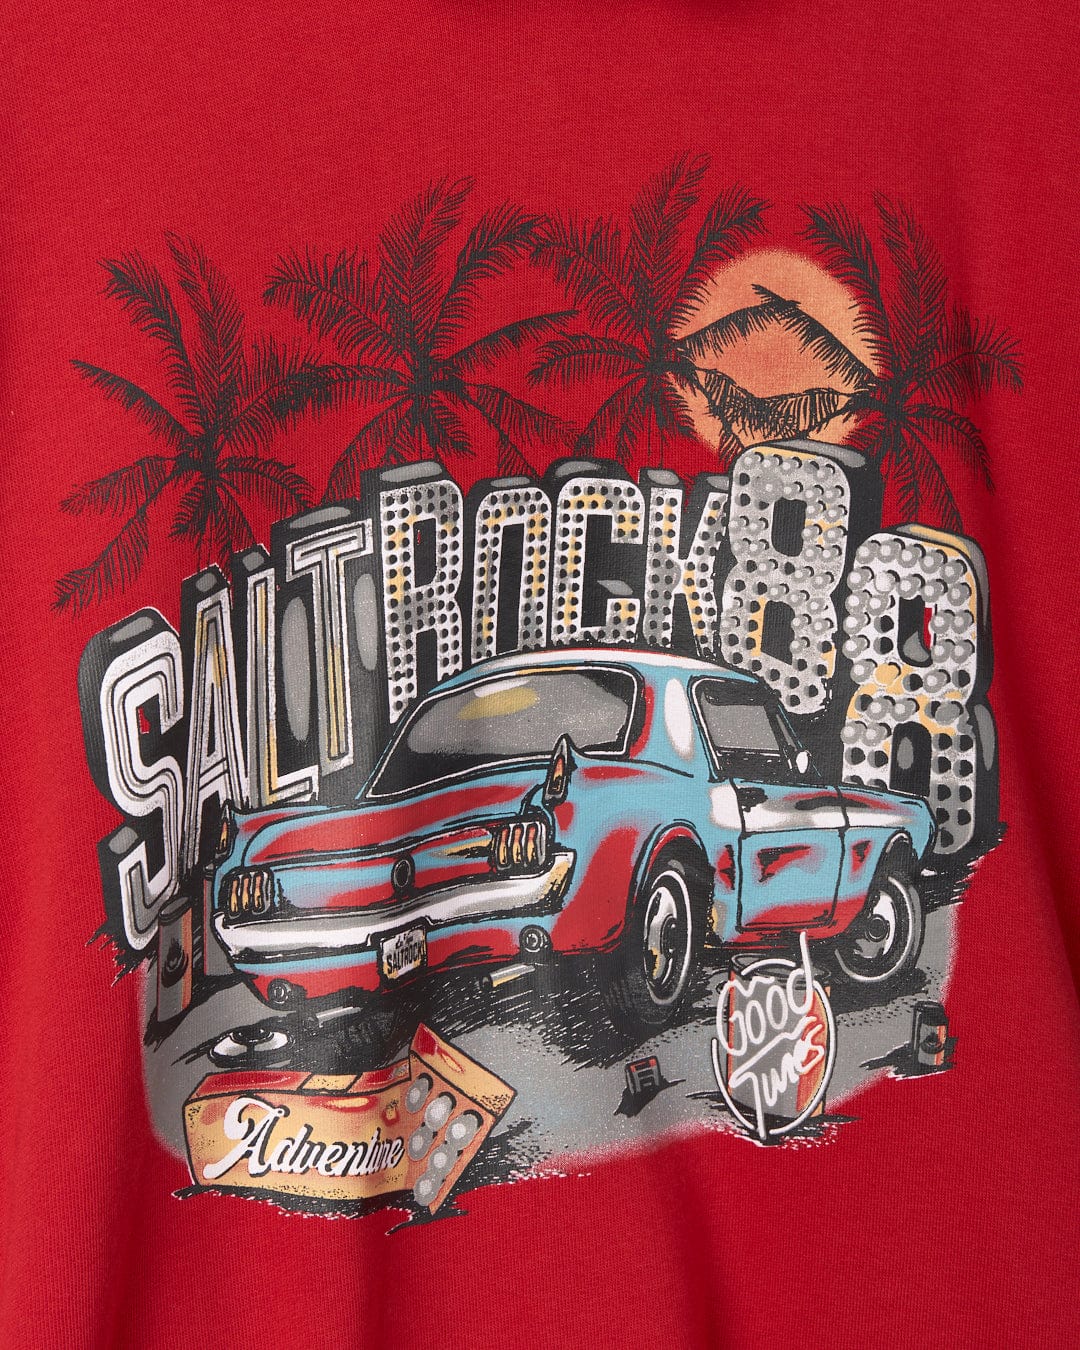 Neon Boneyard - Mens Oversized Pop Hoodie - Red featuring a graphic design of a classic car with palm trees, a sunset, and the text "Saltrock 68, adrenaline, good times".